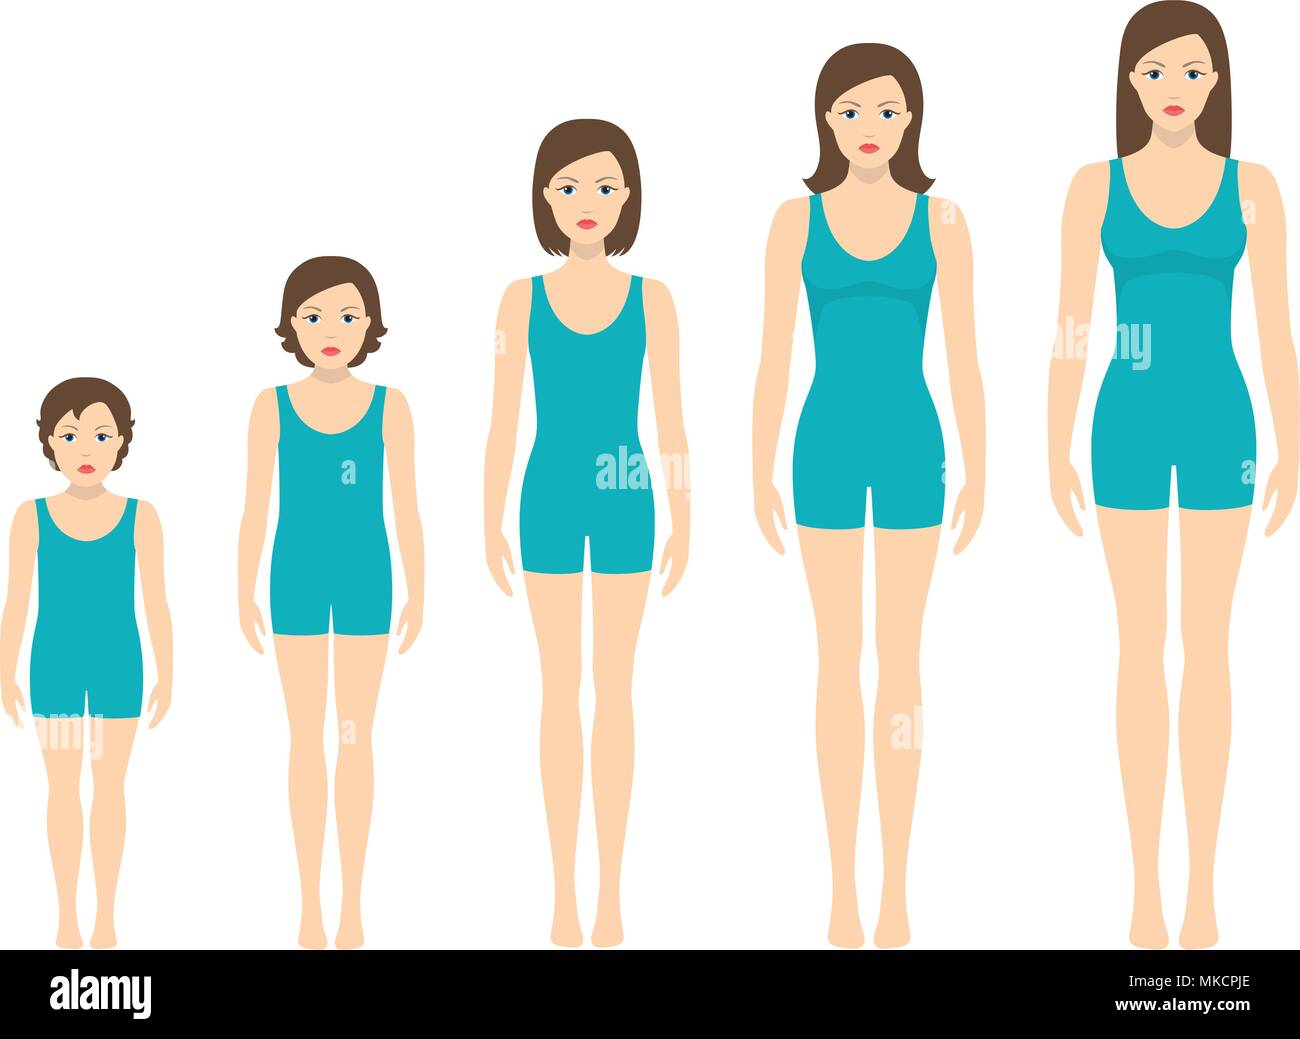 Women's body proportions changing with age. Girl's body growth stages